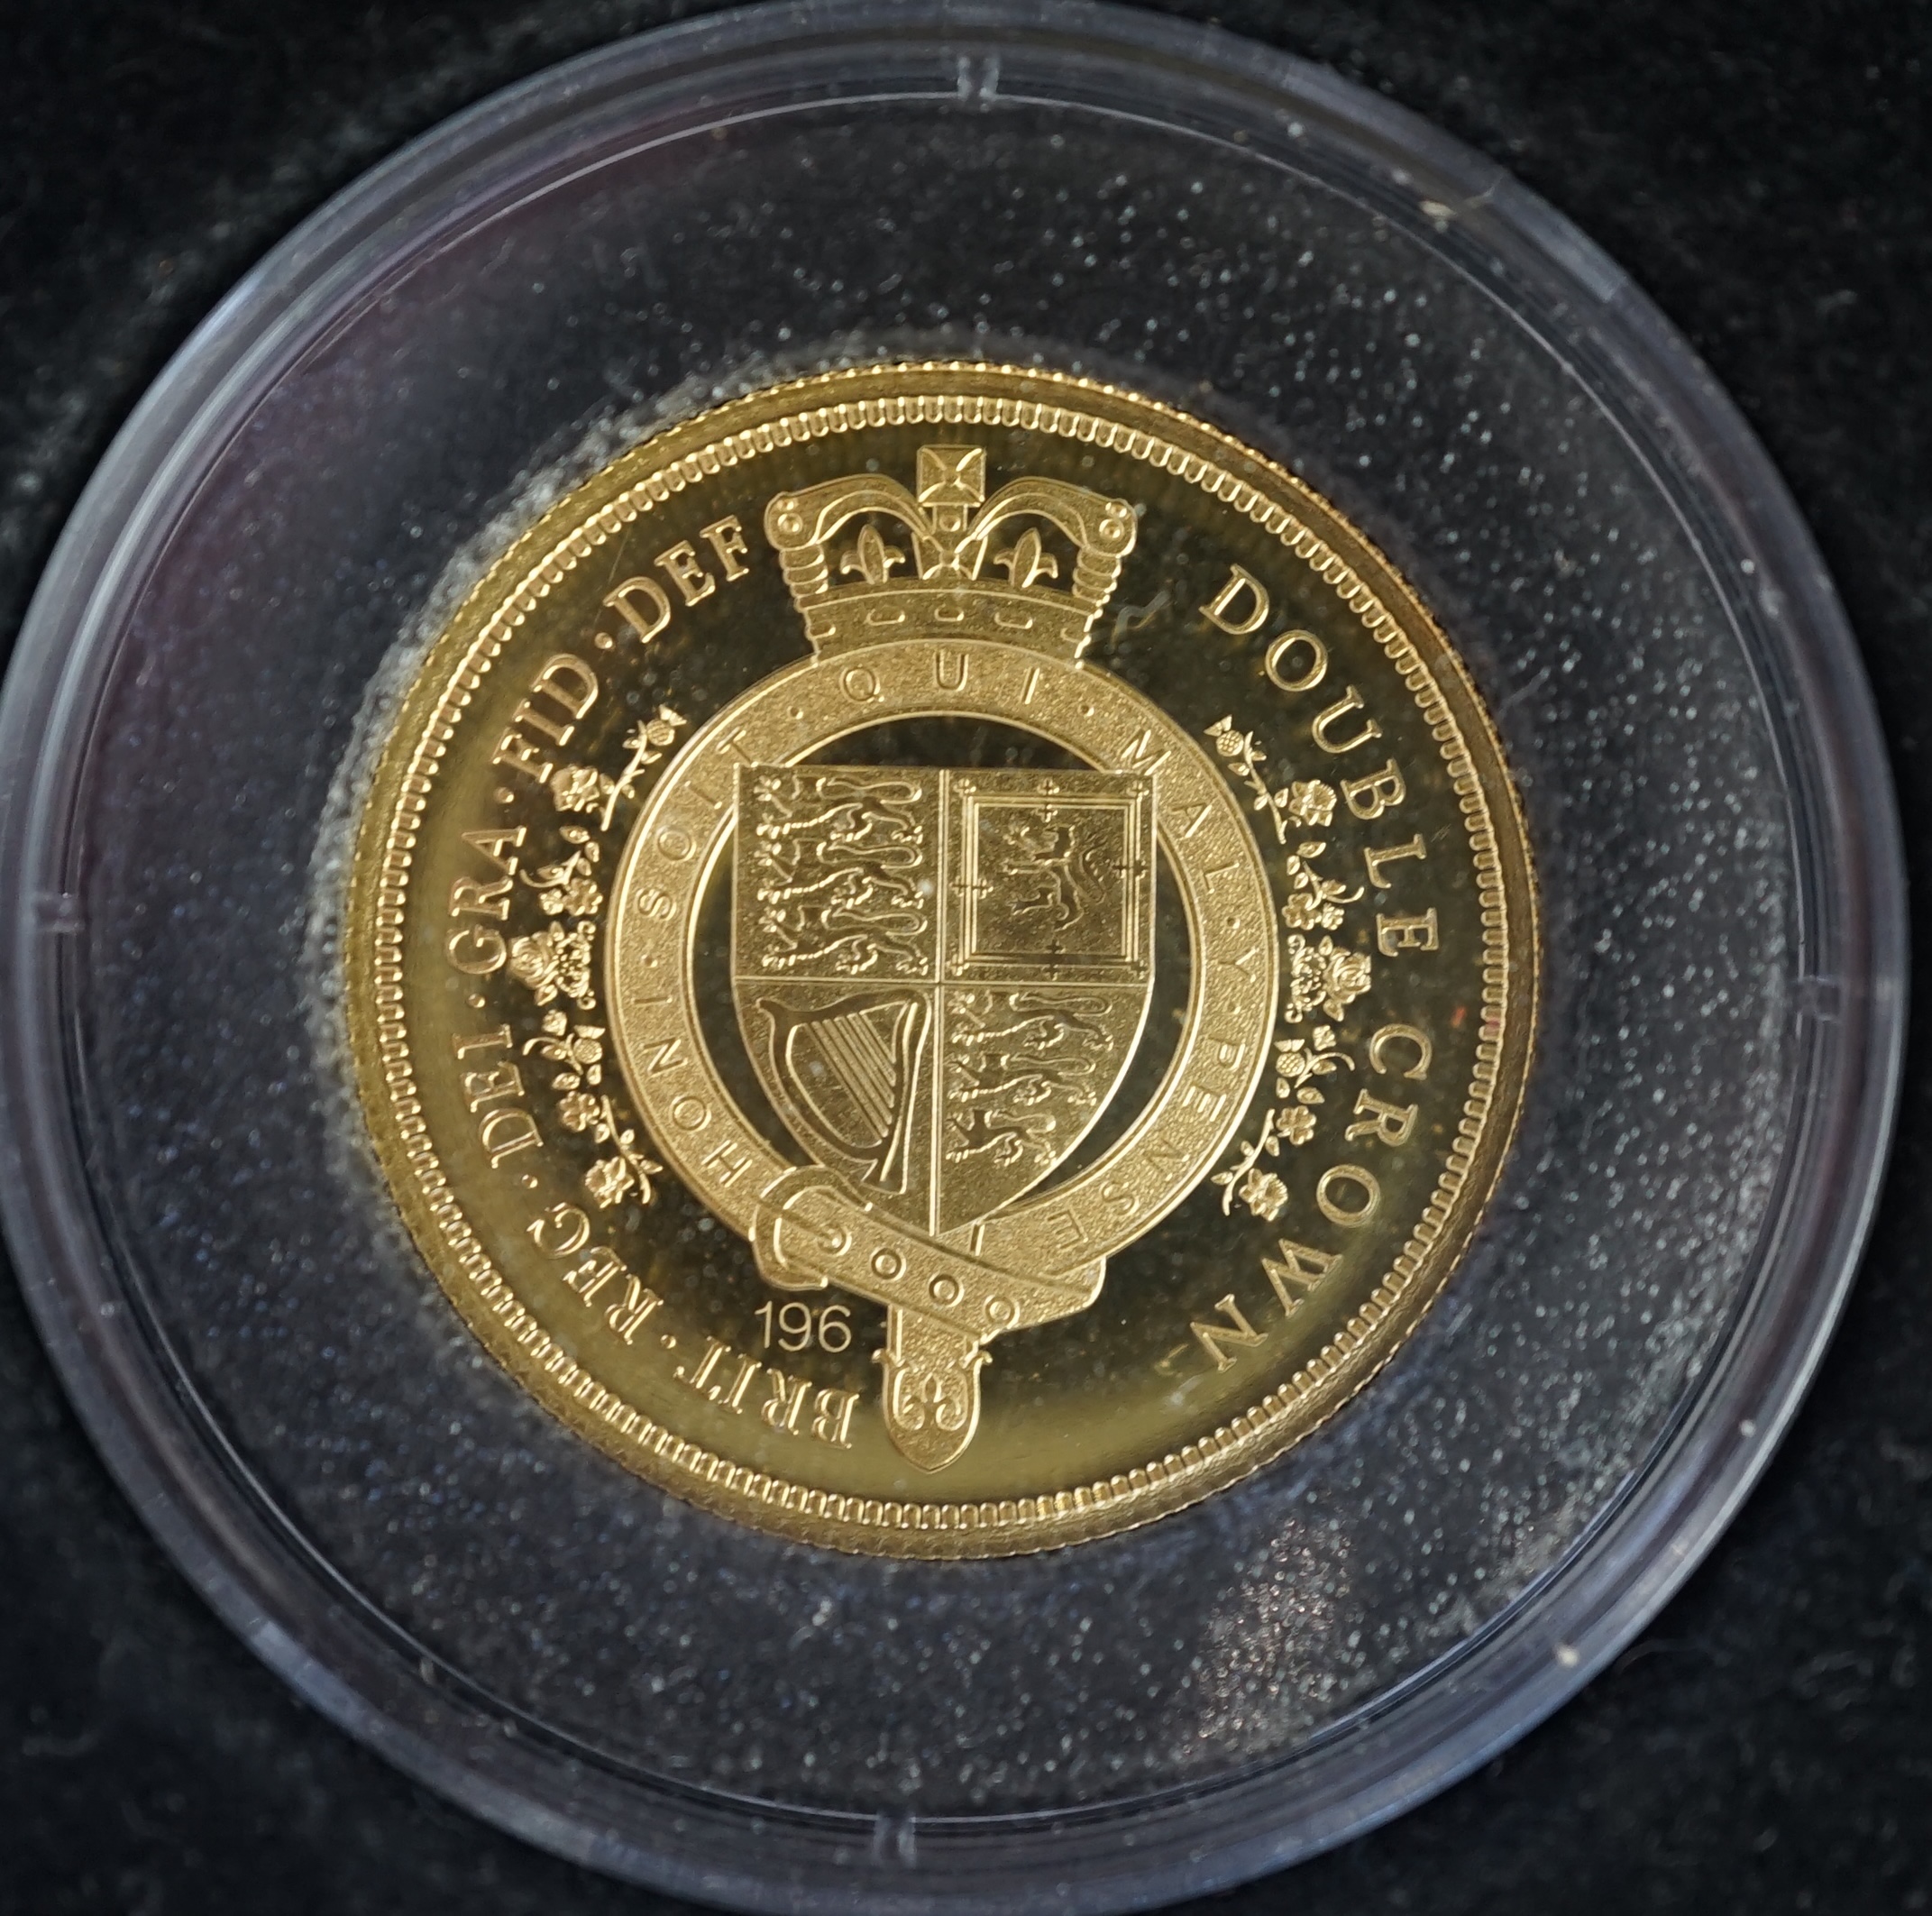 Gold commemorative coins, Elizabeth II, Tristan da Cunha, The Vivat Regina proof 9ct. gold double crown coin, 2015, in Bradford Exchange case with certificate